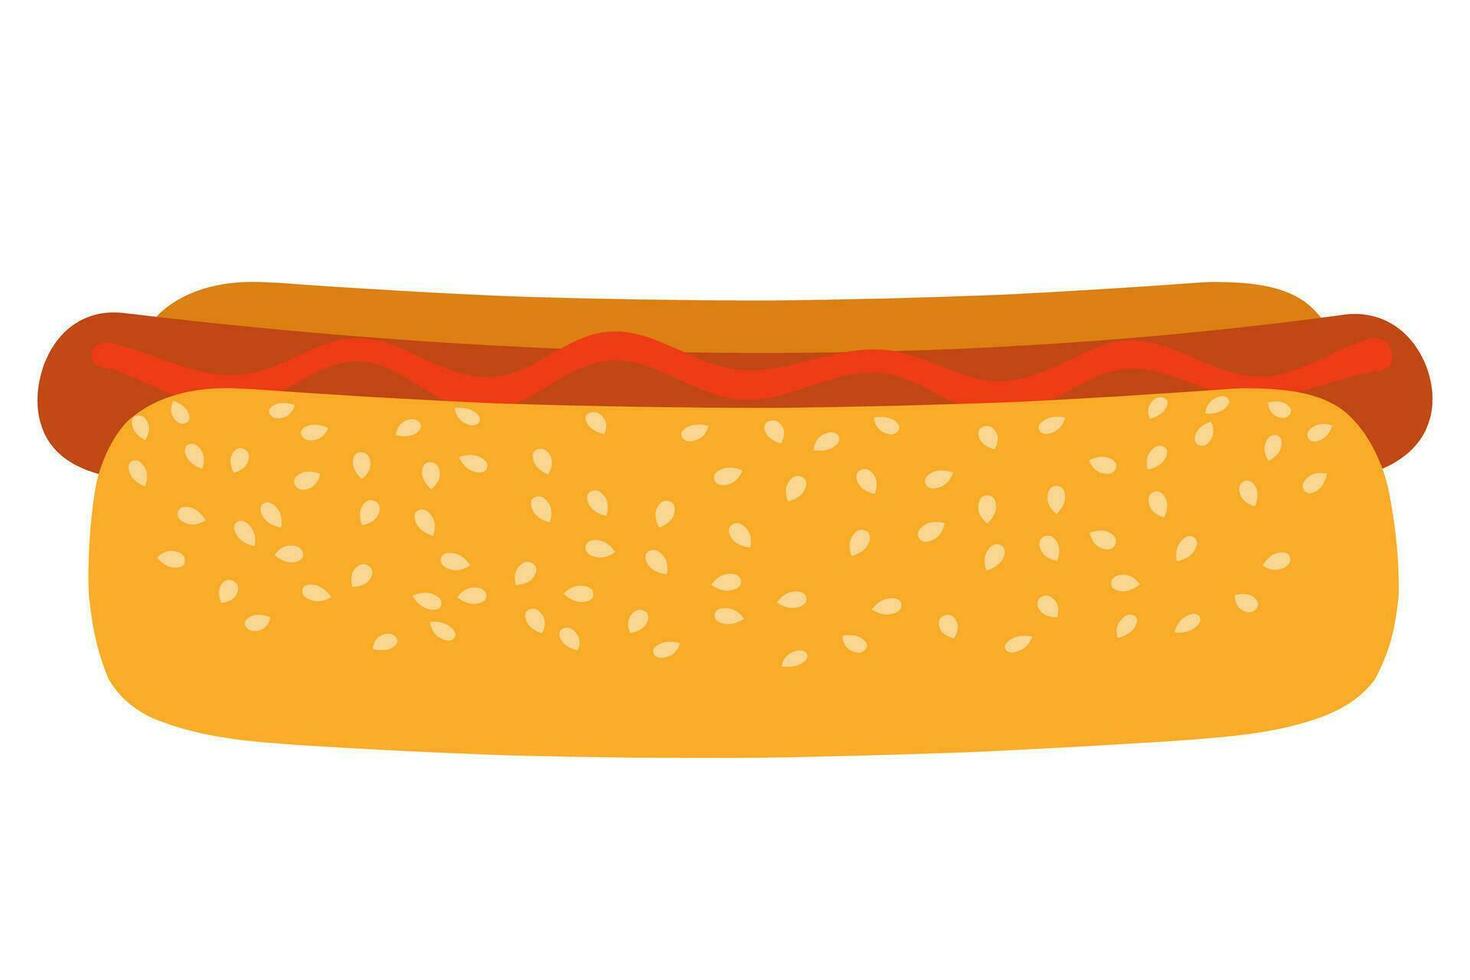 hot dog fast food stock vector illustration isolated on white background